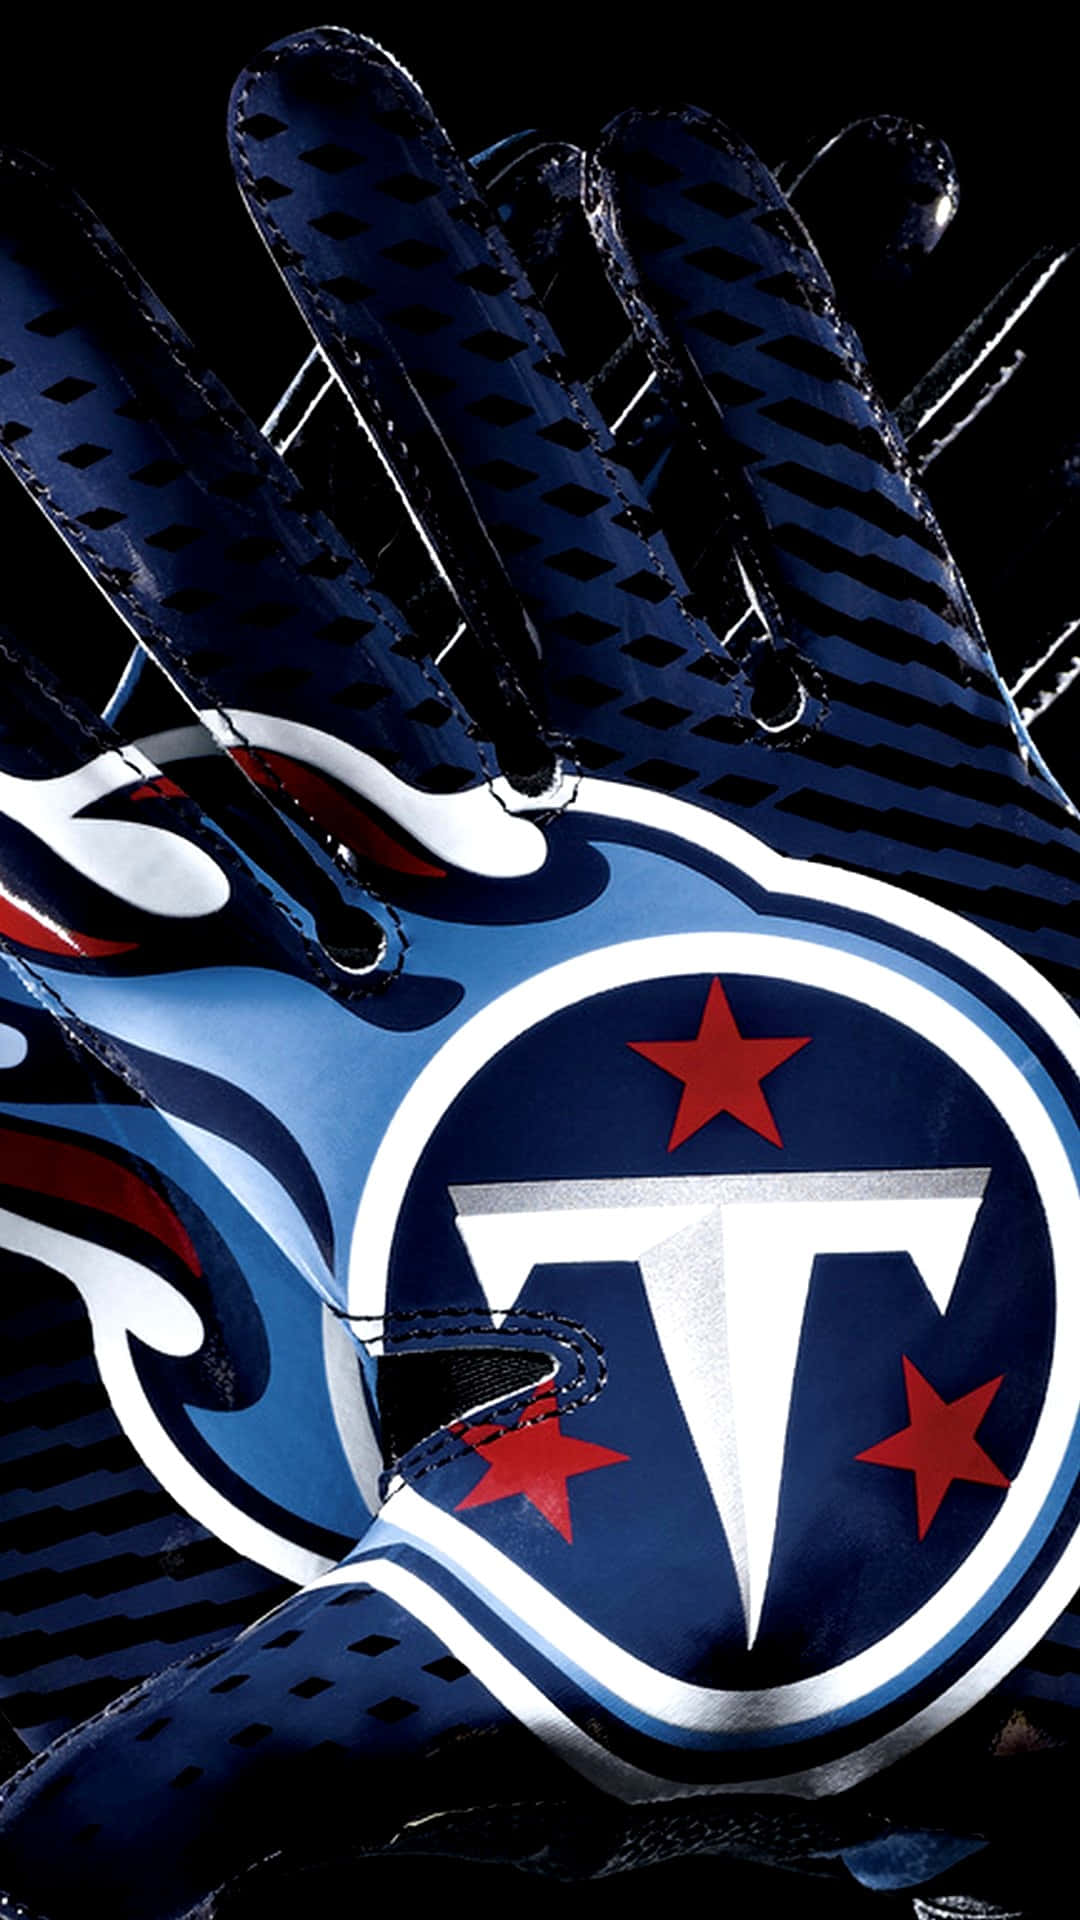 Rep Your Squad with a Tennessee Titans Iphone Wallpaper